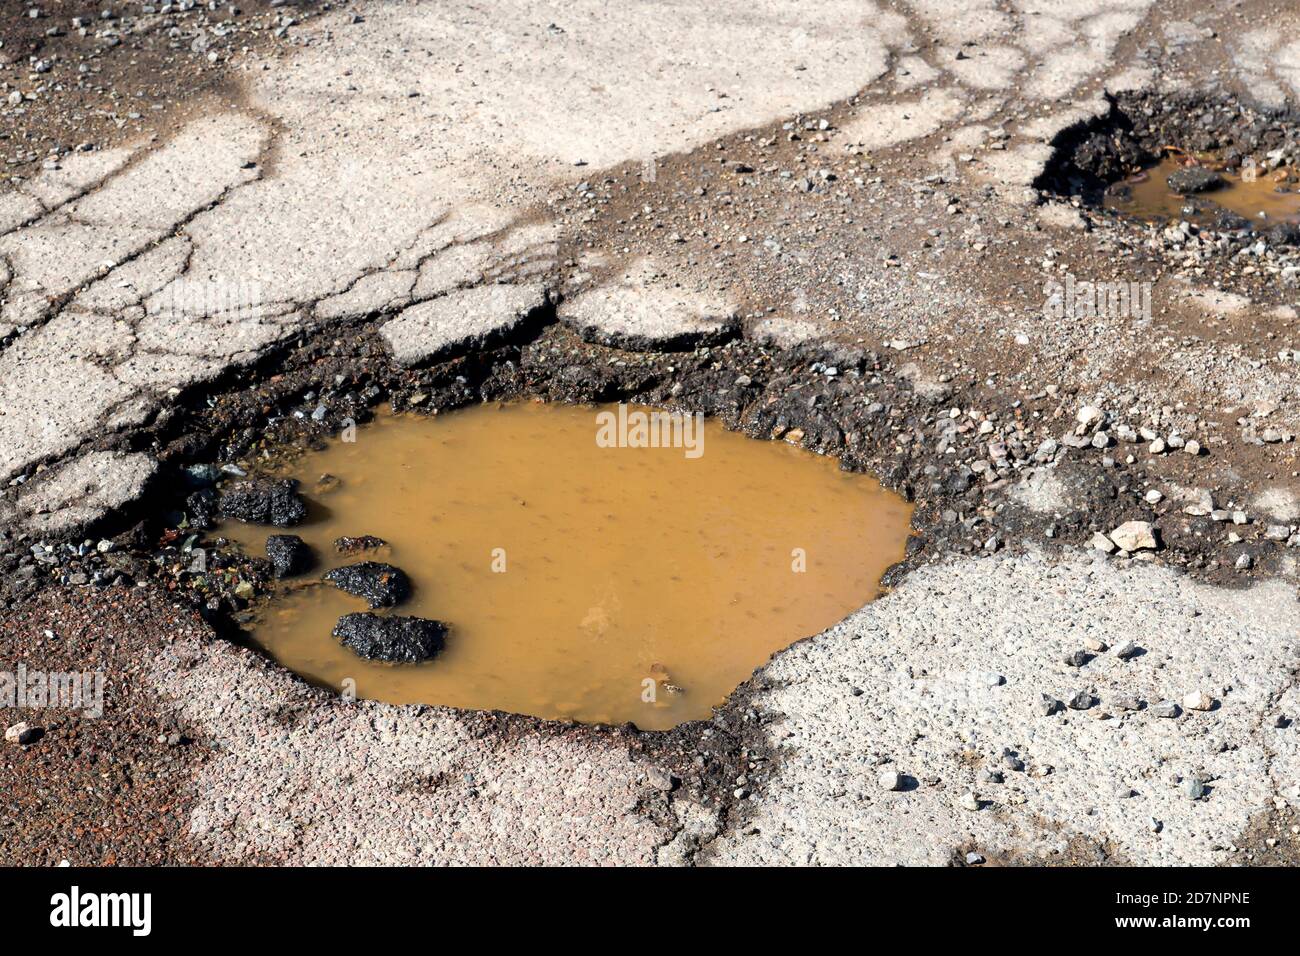 Potholes on a paved road. The road is in very poor condition. There is dirty water in the potholes. Stock Photo